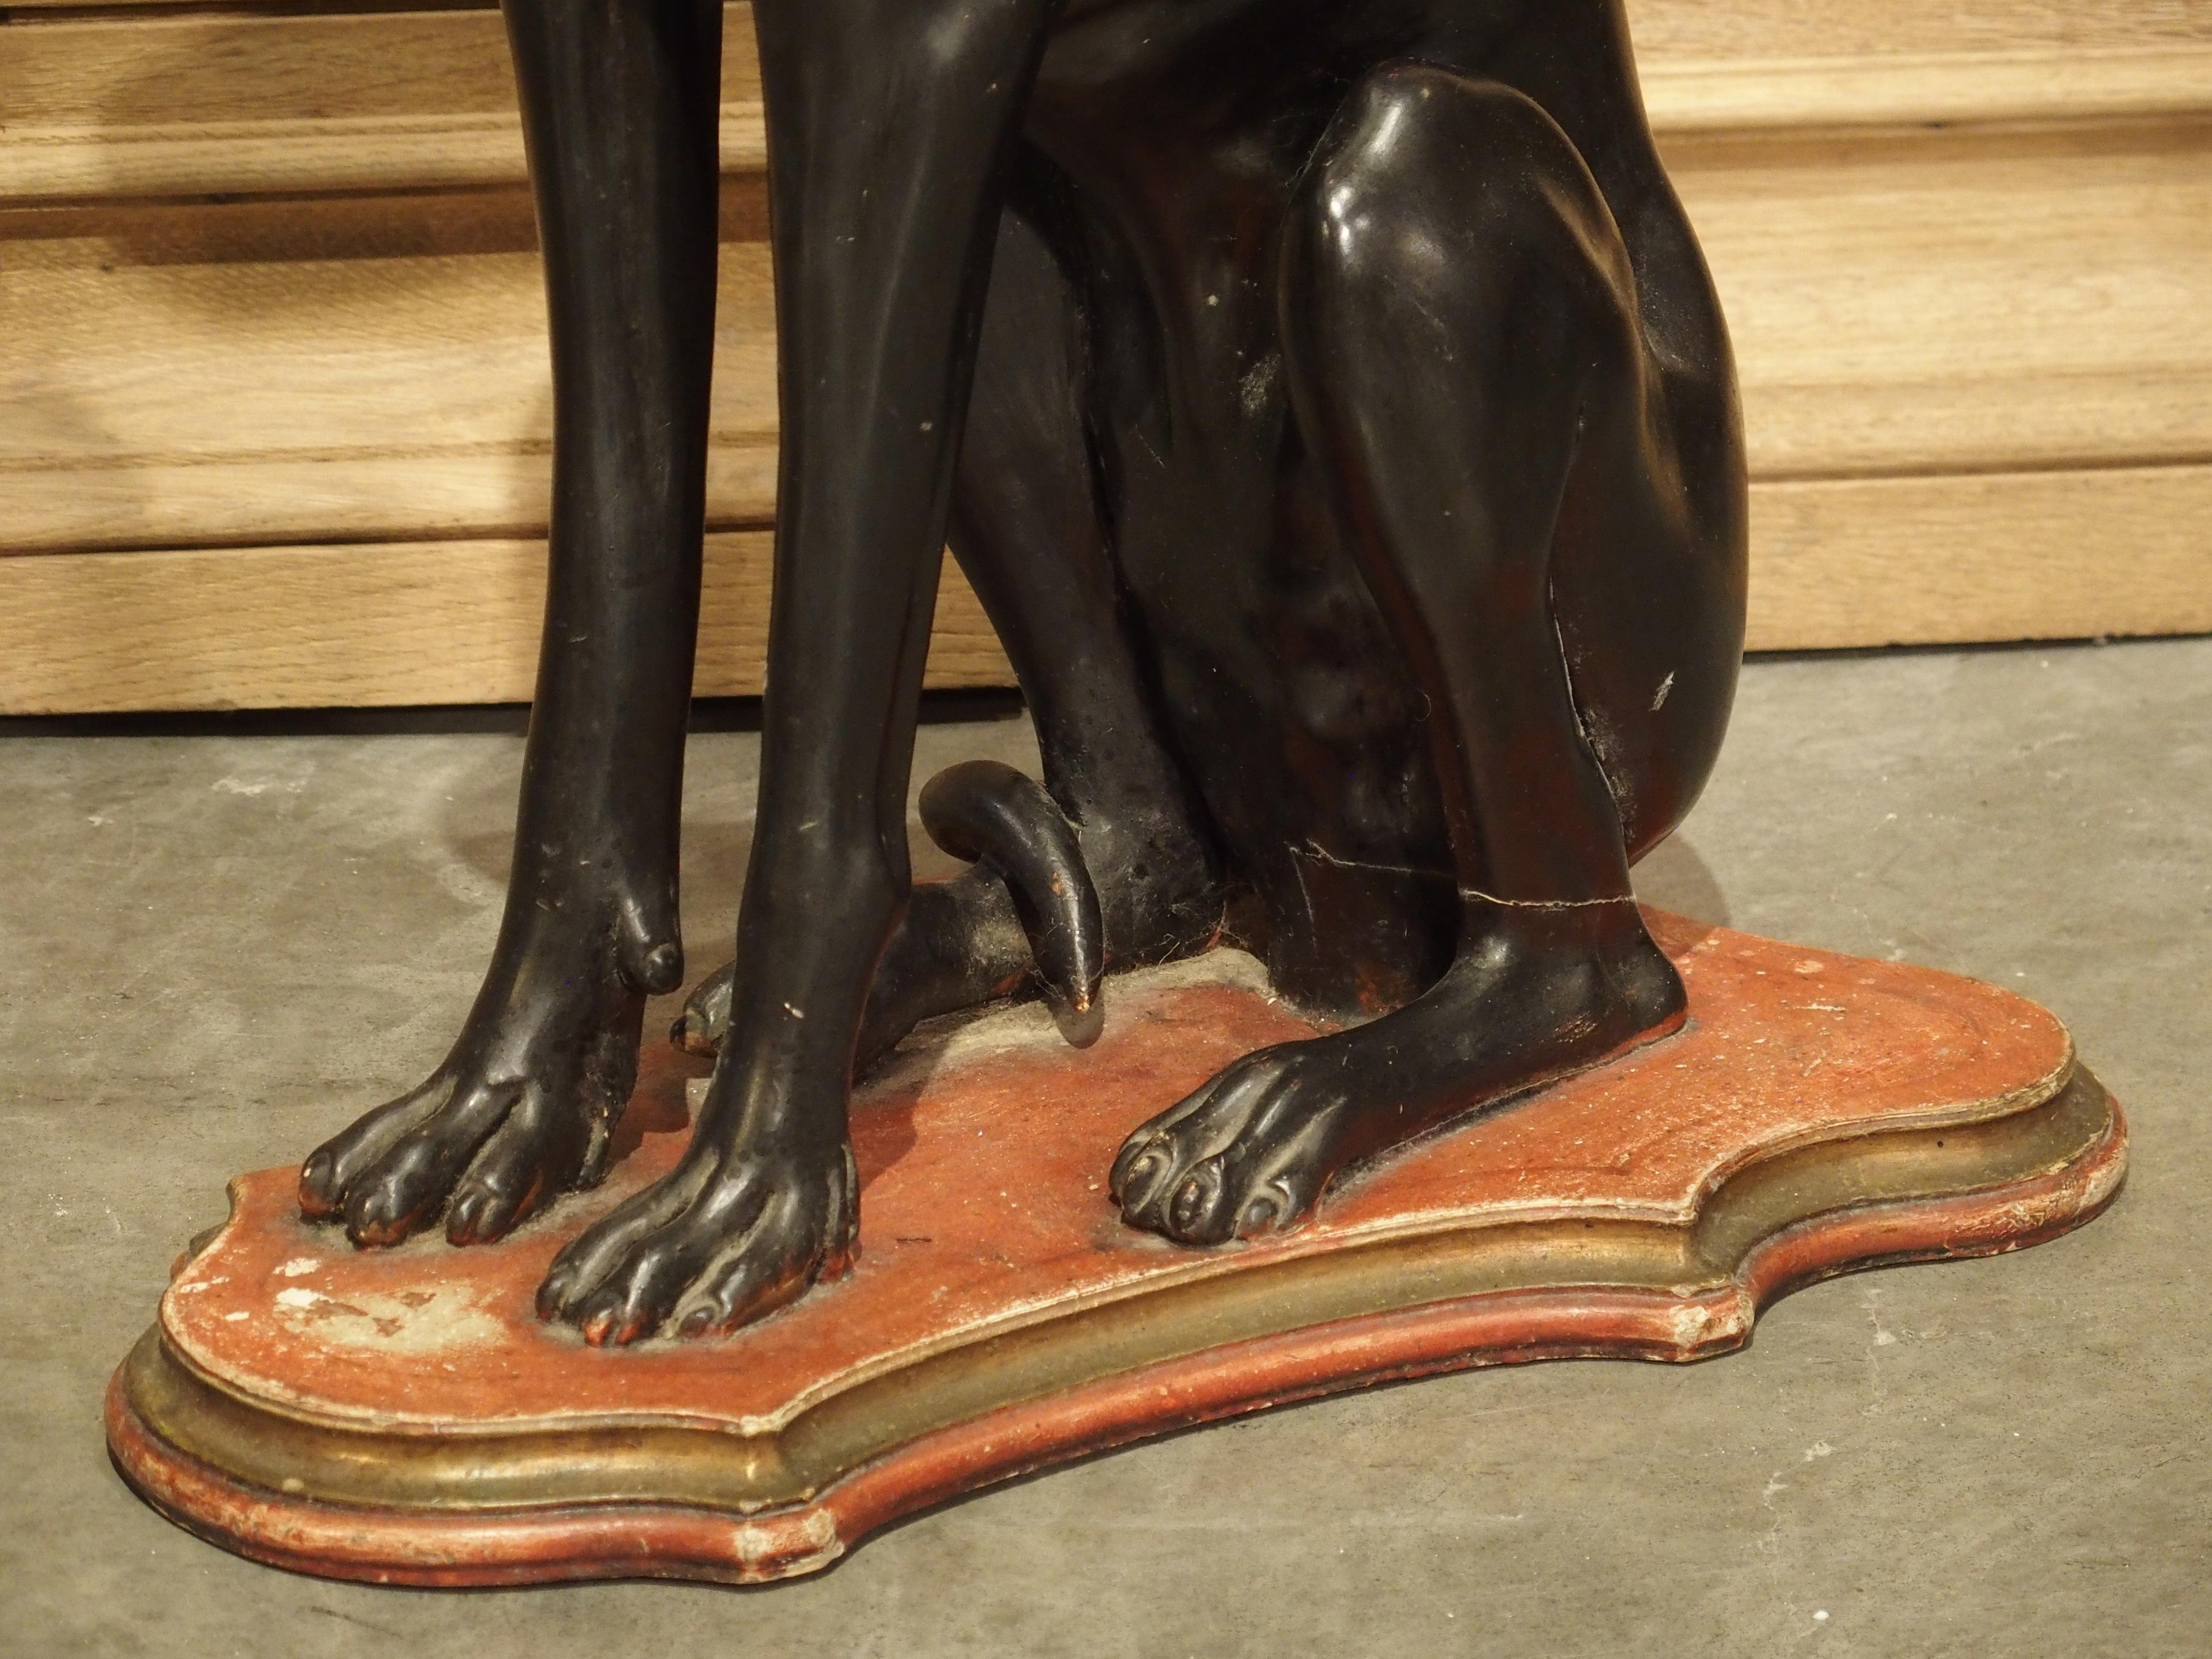 Carved and painted in Italy in the early 1900s, this statue of an Italian greyhound is a must have for any dog lover. The Italian greyhound is known for being a playful, affectionate, and alert dog. Here, we see the dog sitting attentively, as if